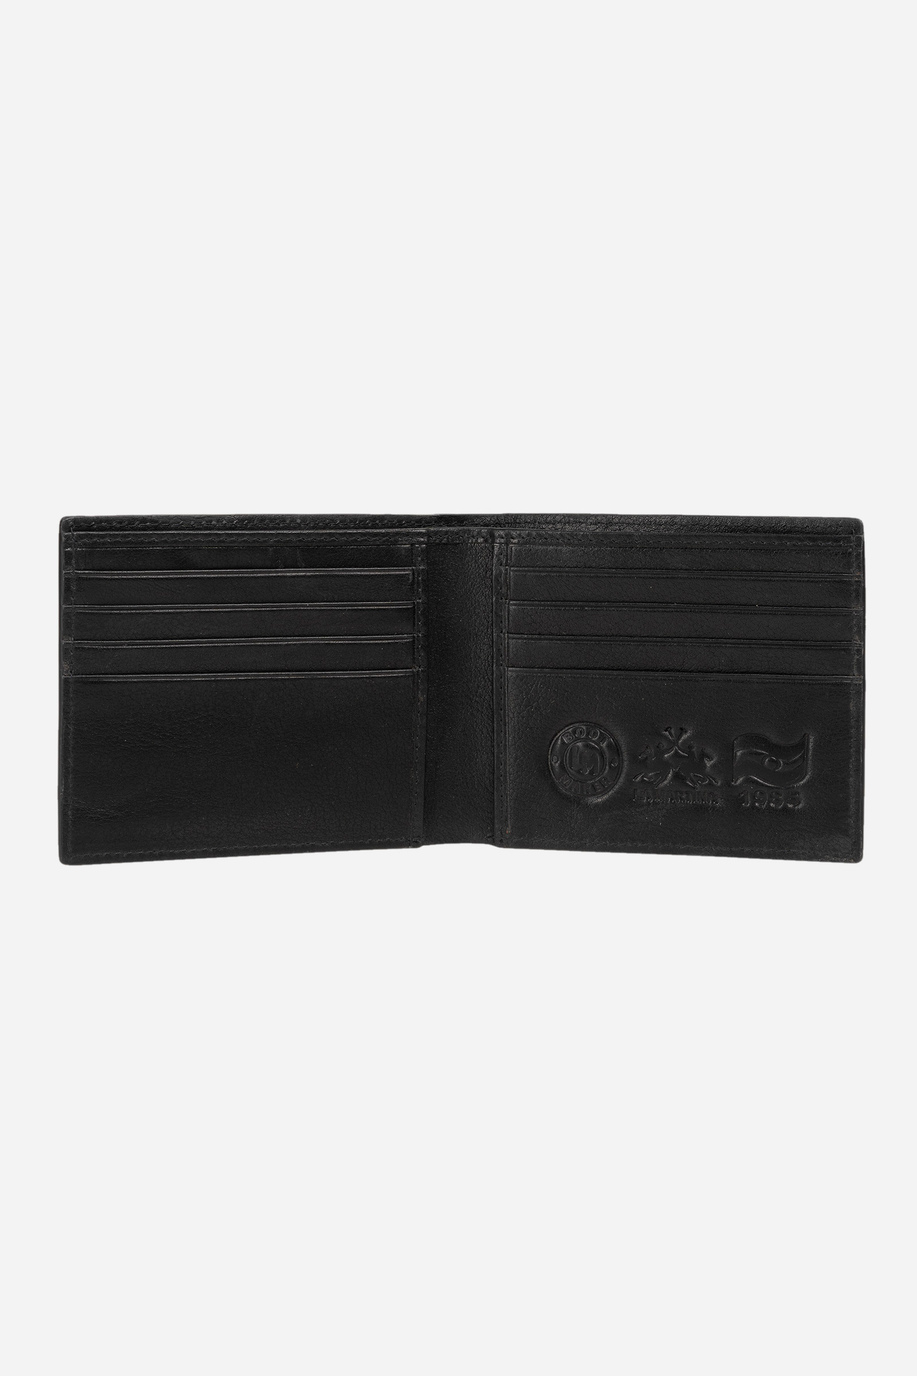 Men's leather wallet - Paulo - Wallets and key chains | La Martina - Official Online Shop